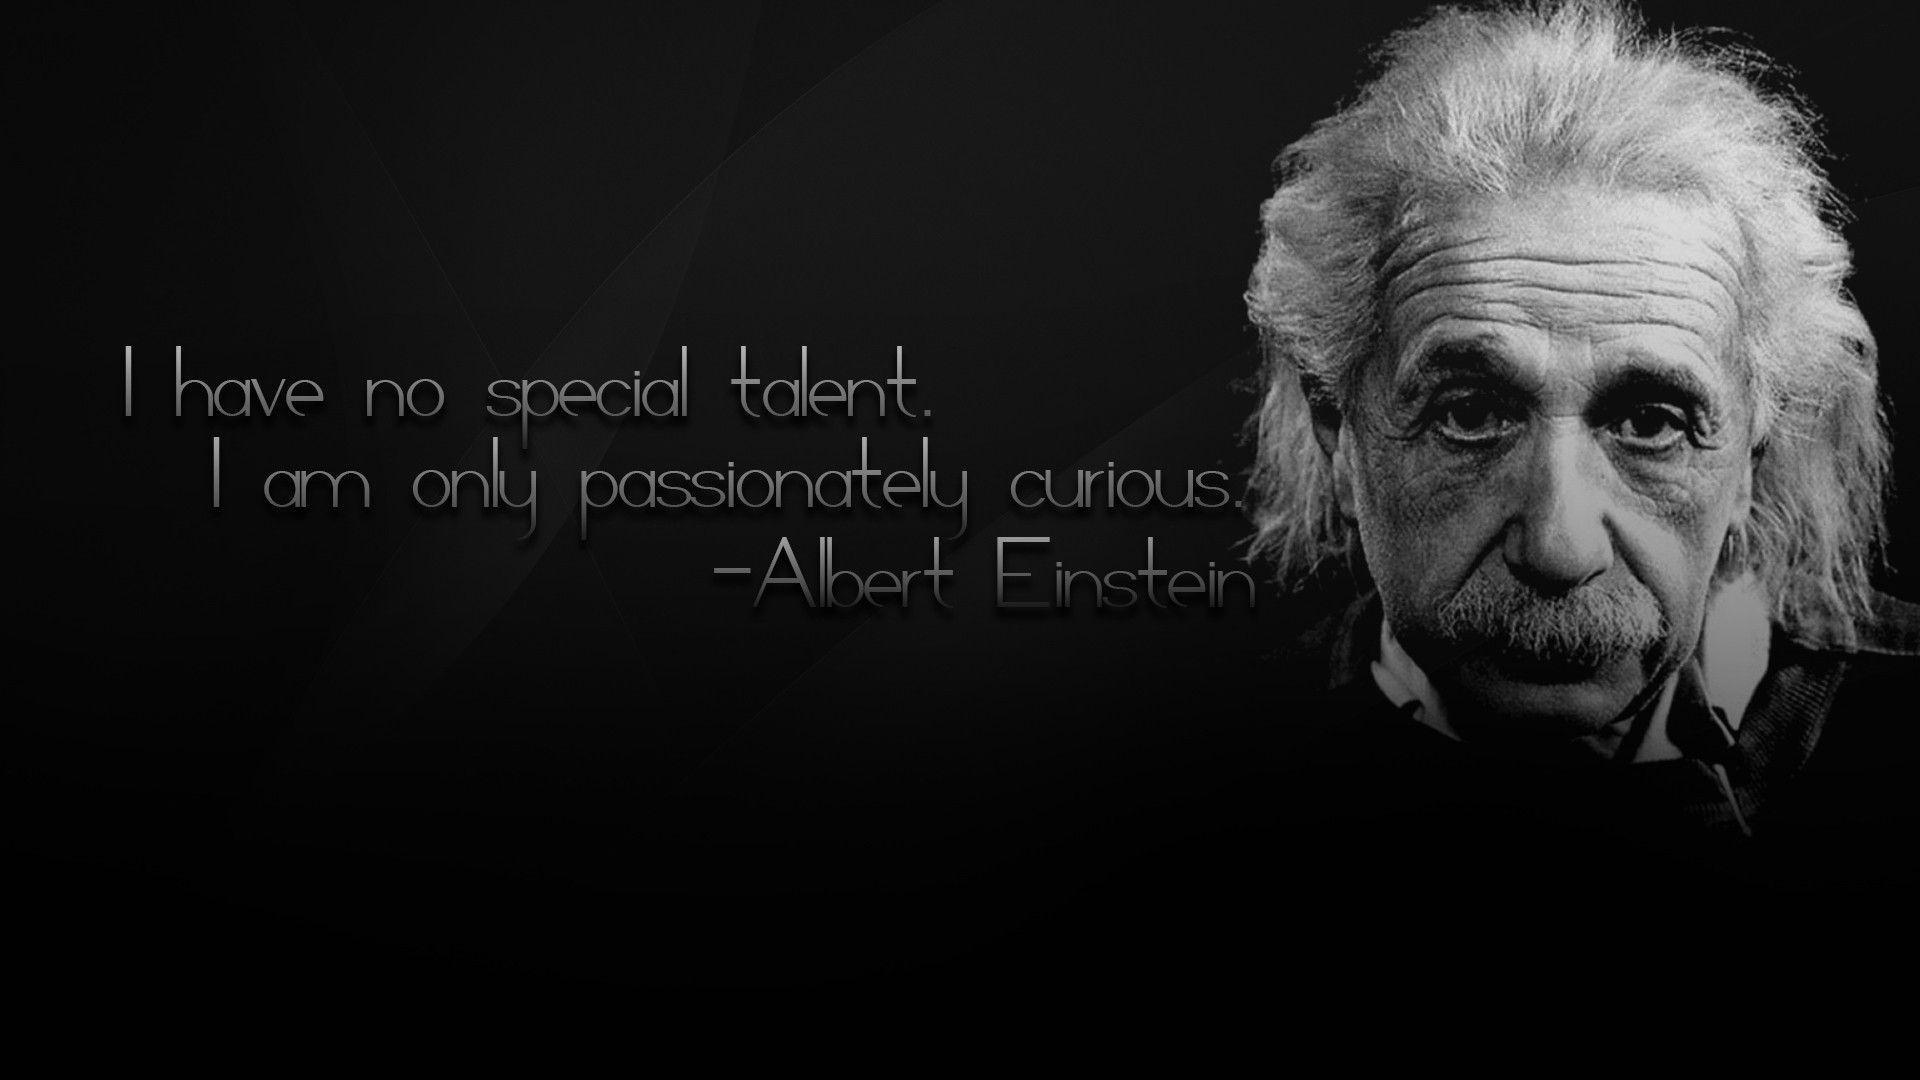 Quote Full HD Wallpaper and Backgroundx1080